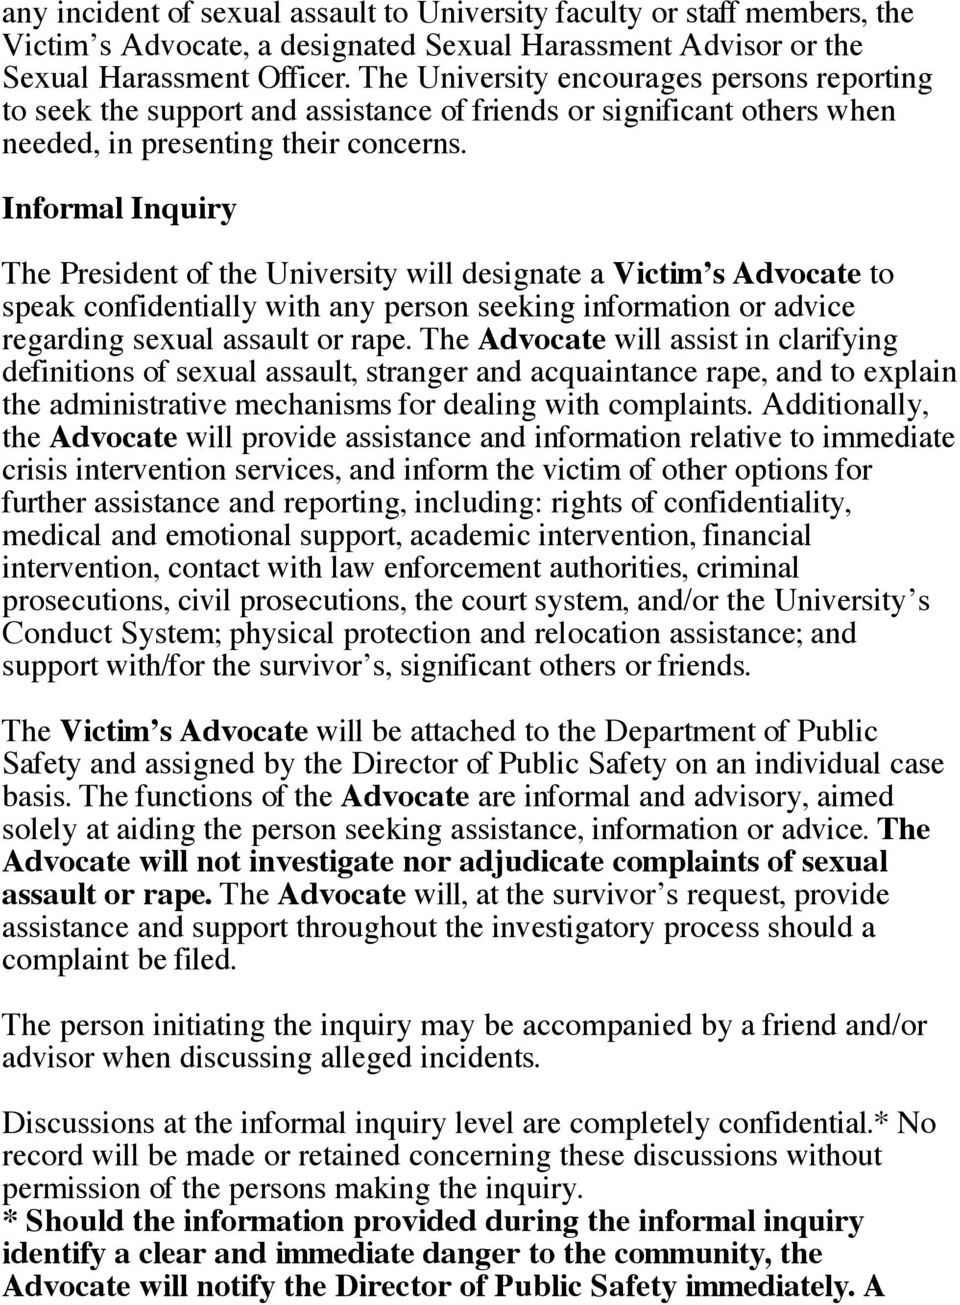 Informal Inquiry The President of the University will designate a Victim s Advocate to speak confidentially with any person seeking information or advice regarding sexual assault or rape.